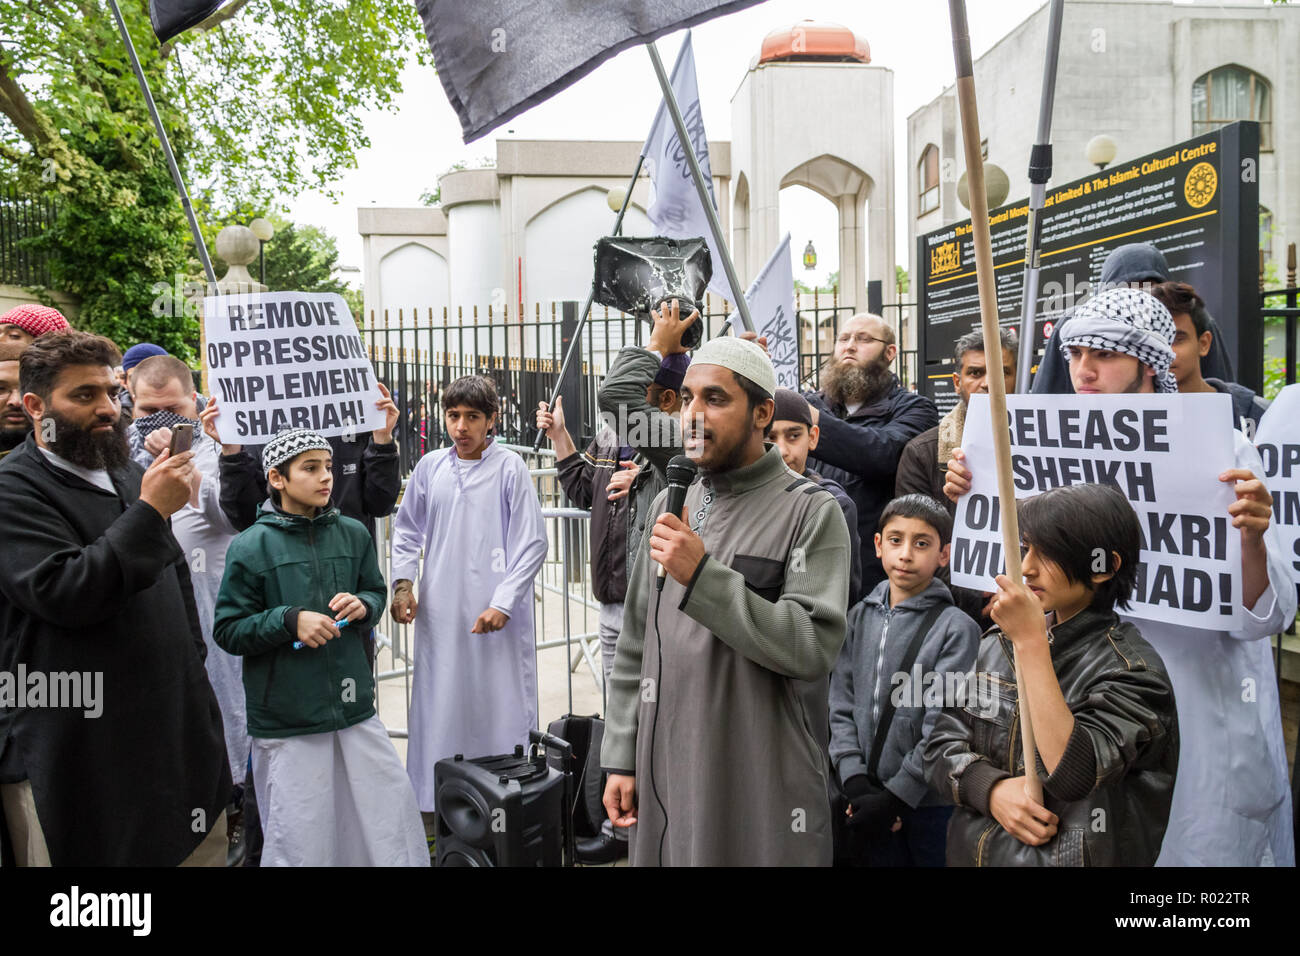 London, UK. 30th May, 2014. File Image from 30-05-2014: Lewis Ludlow, 26, from Rochester in Kent, a Muslim convert (seen second left, face covering) also used the name Ali Hussain, is due to be sentenced for plotting an Islamic State-inspired attack on Oxford Street in which he hoped to kill 100 people. Ludlow is seen here in 2014 outside the London Central Mosque during a Islamist protest with speaker Mohammed Mizanur Rahman (with mic) who was jailed in 2016 along with radical cleric Anjem Choudary. Credit: Guy Corbishley/Alamy Live News Stock Photo